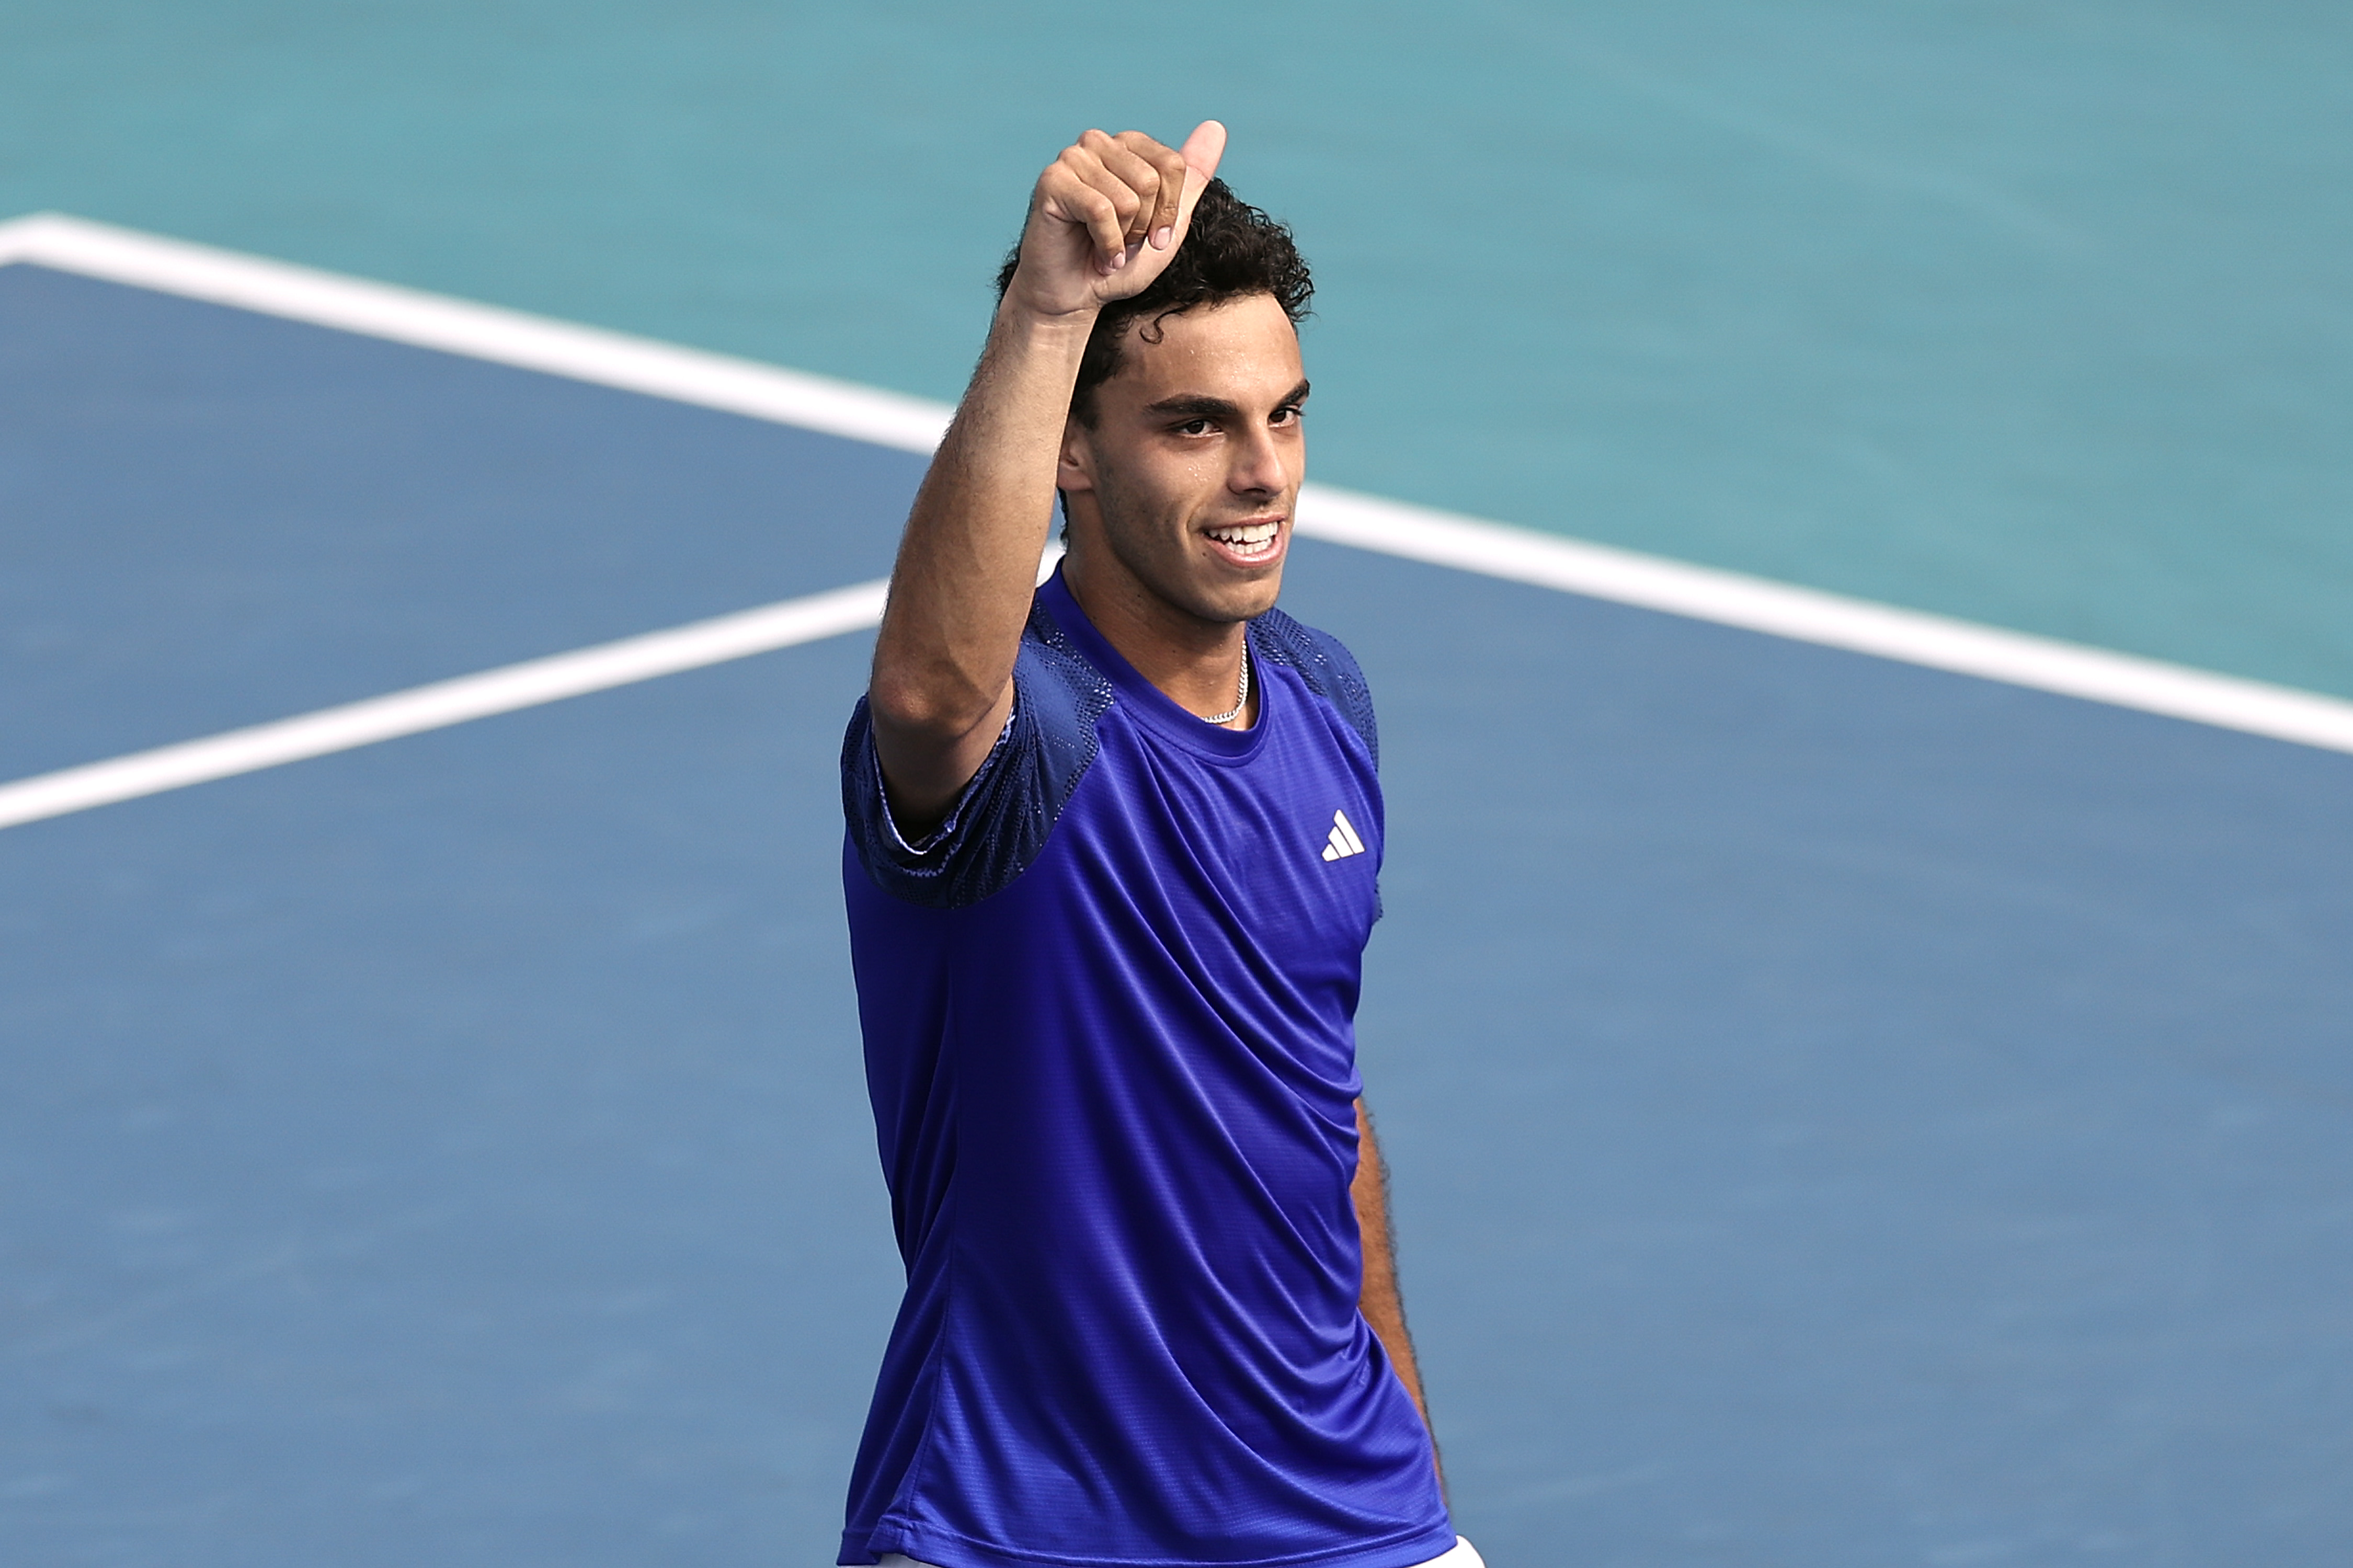 On Miamis faster hard courts, Francisco Cerundolo is thriving again